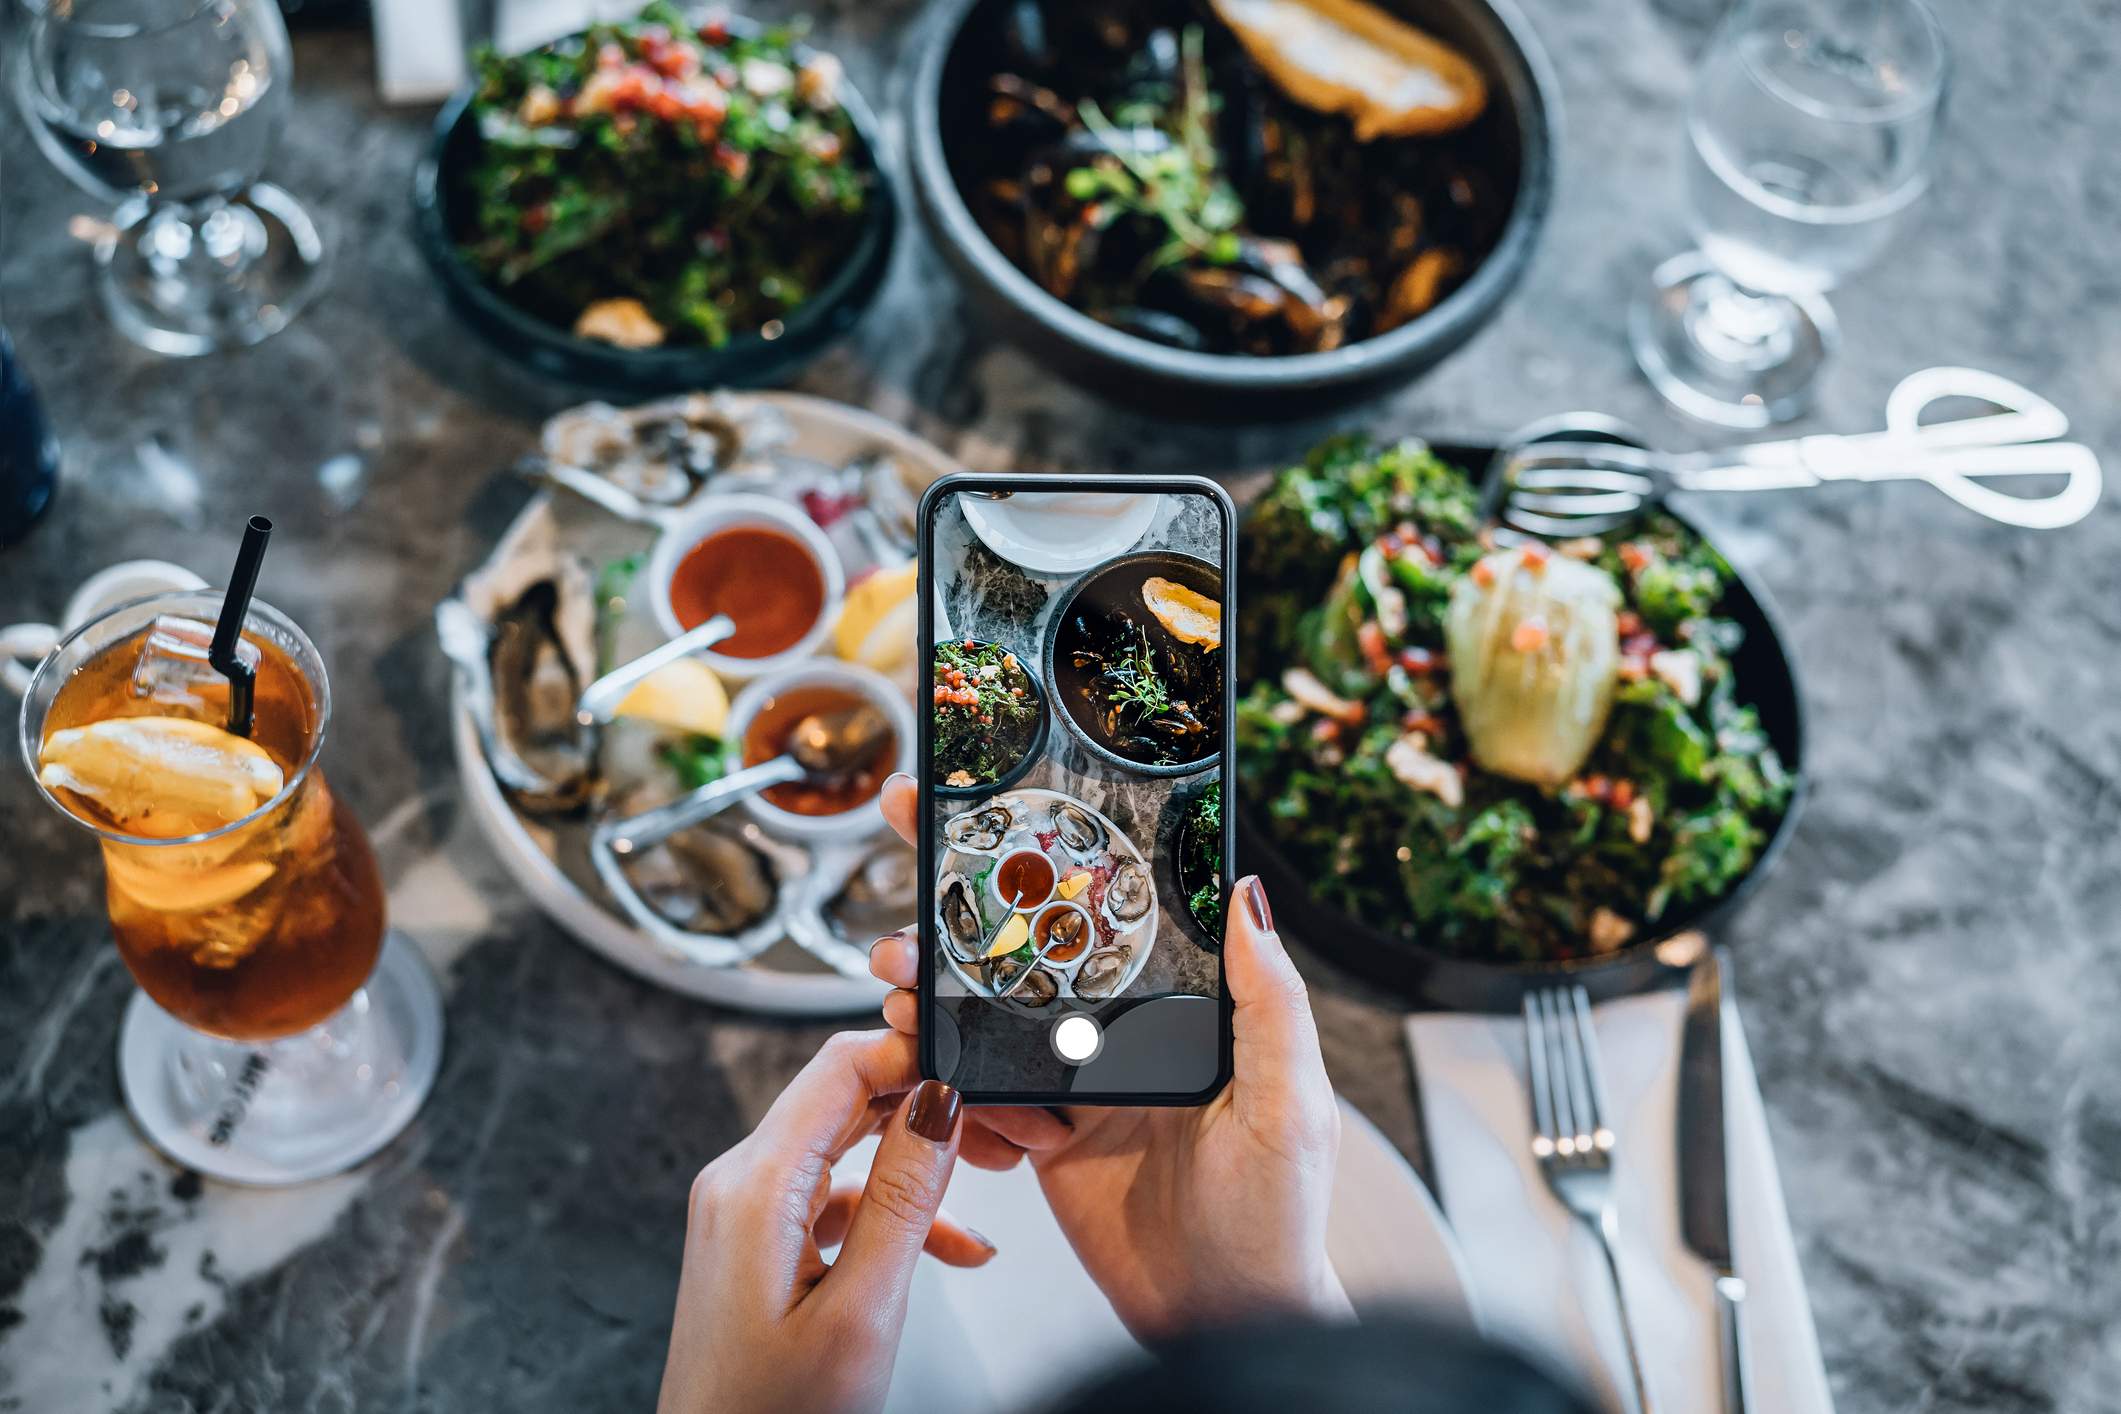 Image depicts a person out of frame holding a phone to take a photo of food on a table. 